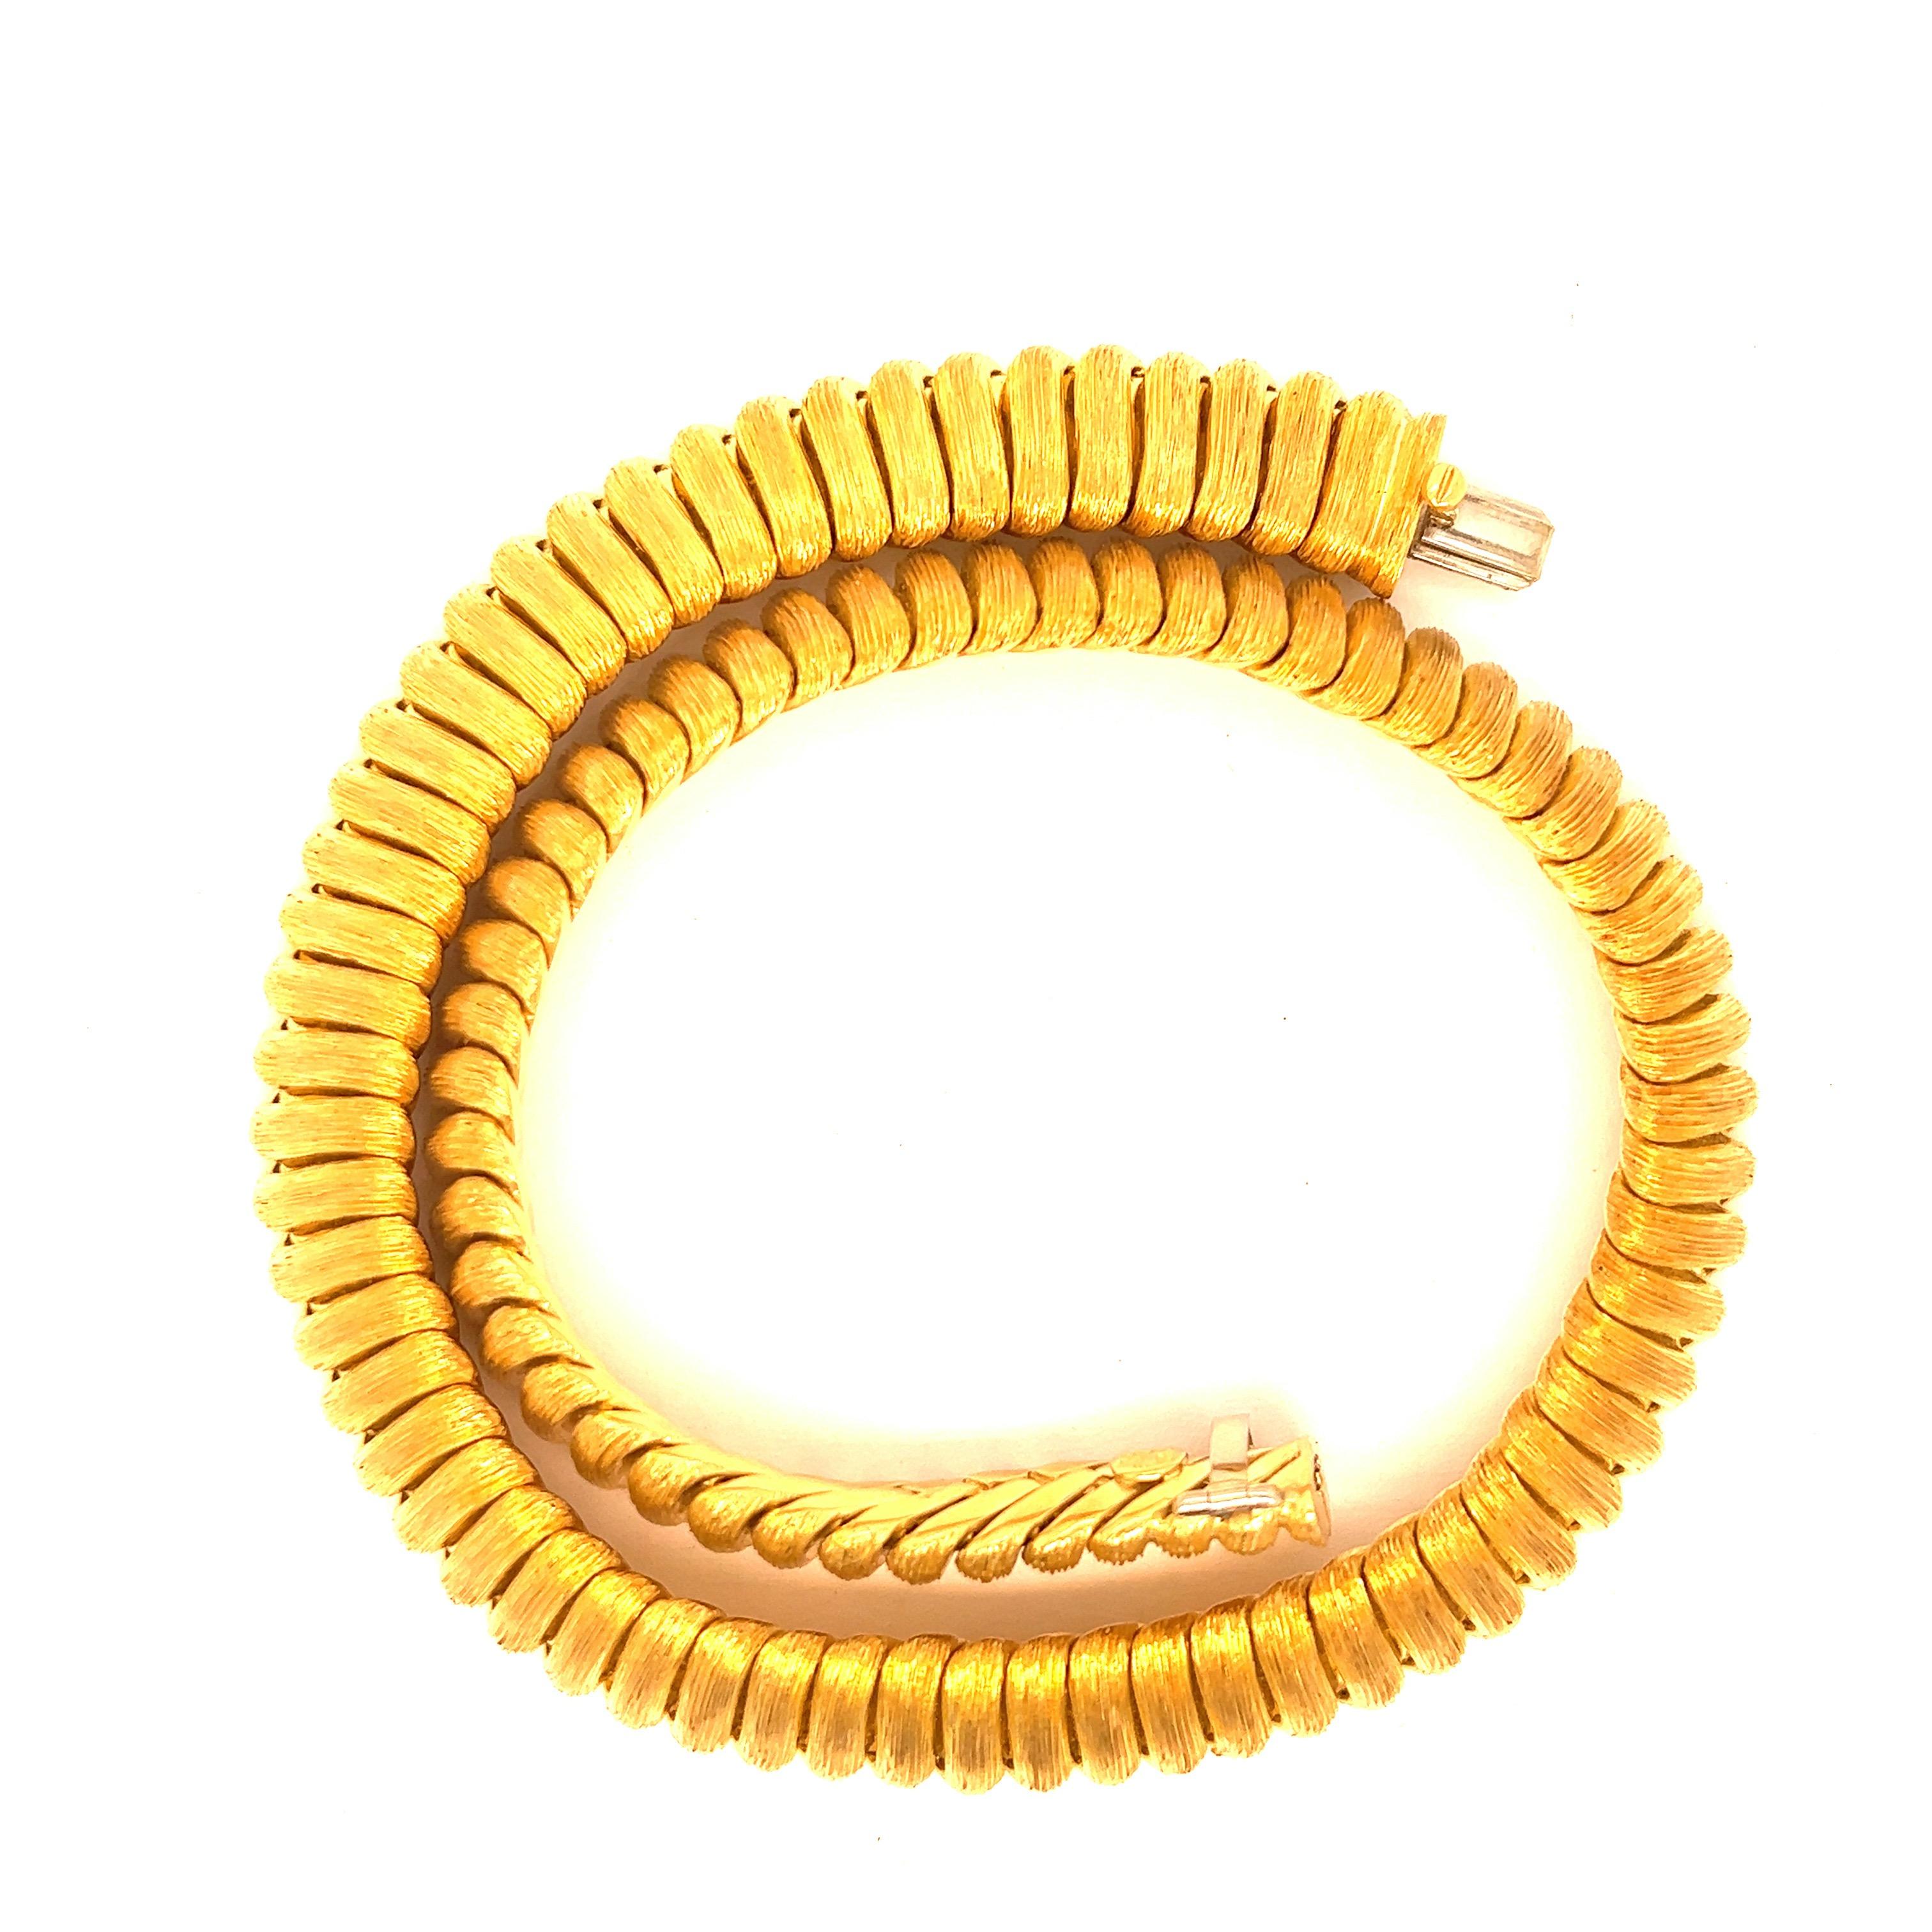 Substantial 18k gold necklace by Henry Dunay, featuring signature brushed finish design. The necklace is 15.5